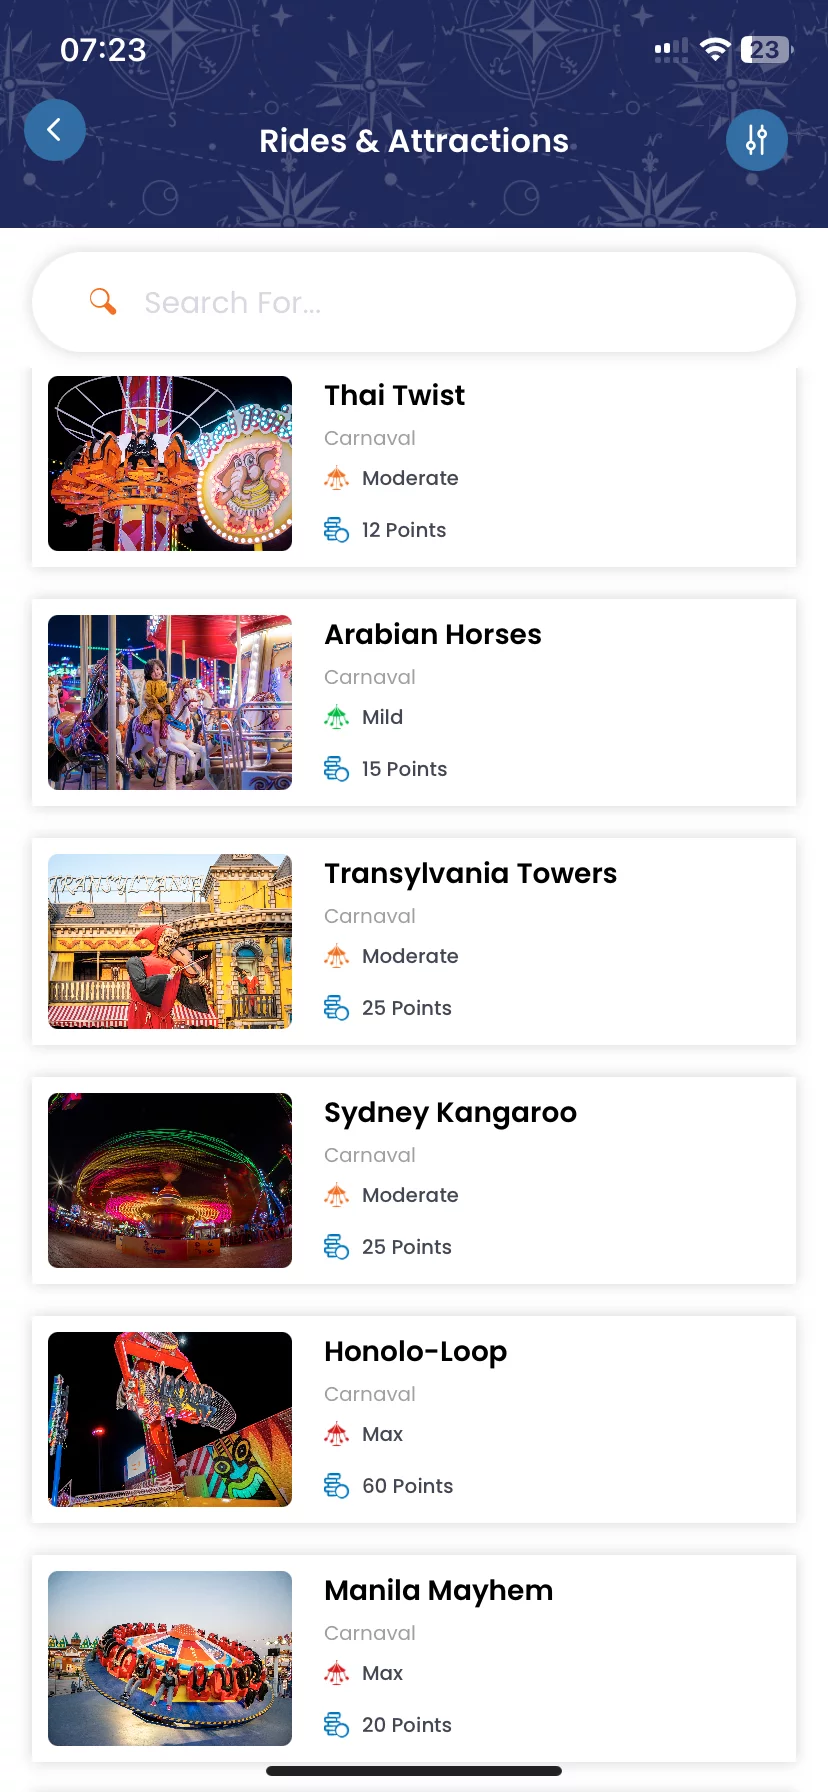 Prices for Rides ANd Attractions in Global Village Dubai